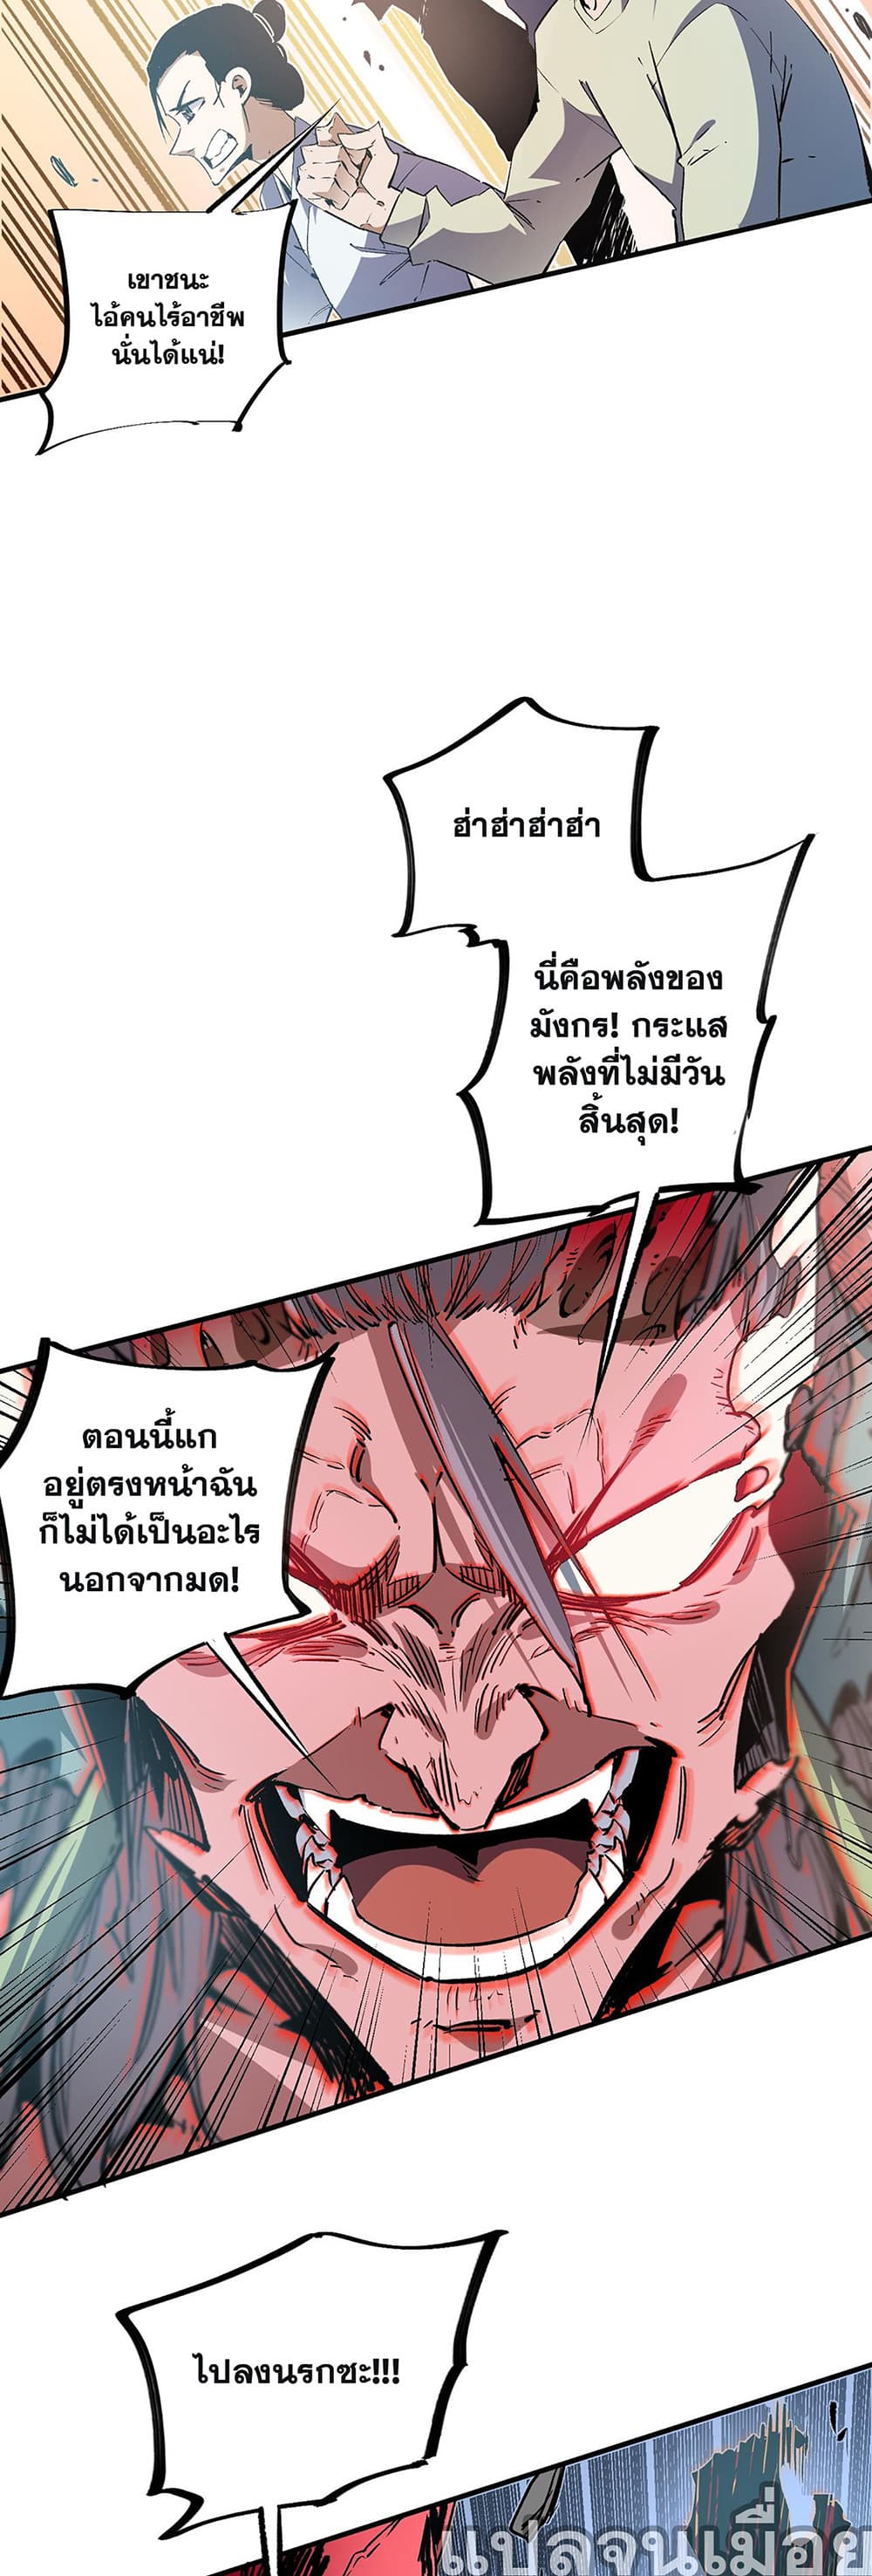 Job Changing for the Entire Population: The Jobless Me Will Terminate the Gods ฉันคือผู้เล่นไร้อาชีพที่สังหารเหล่าเทพ 33-33